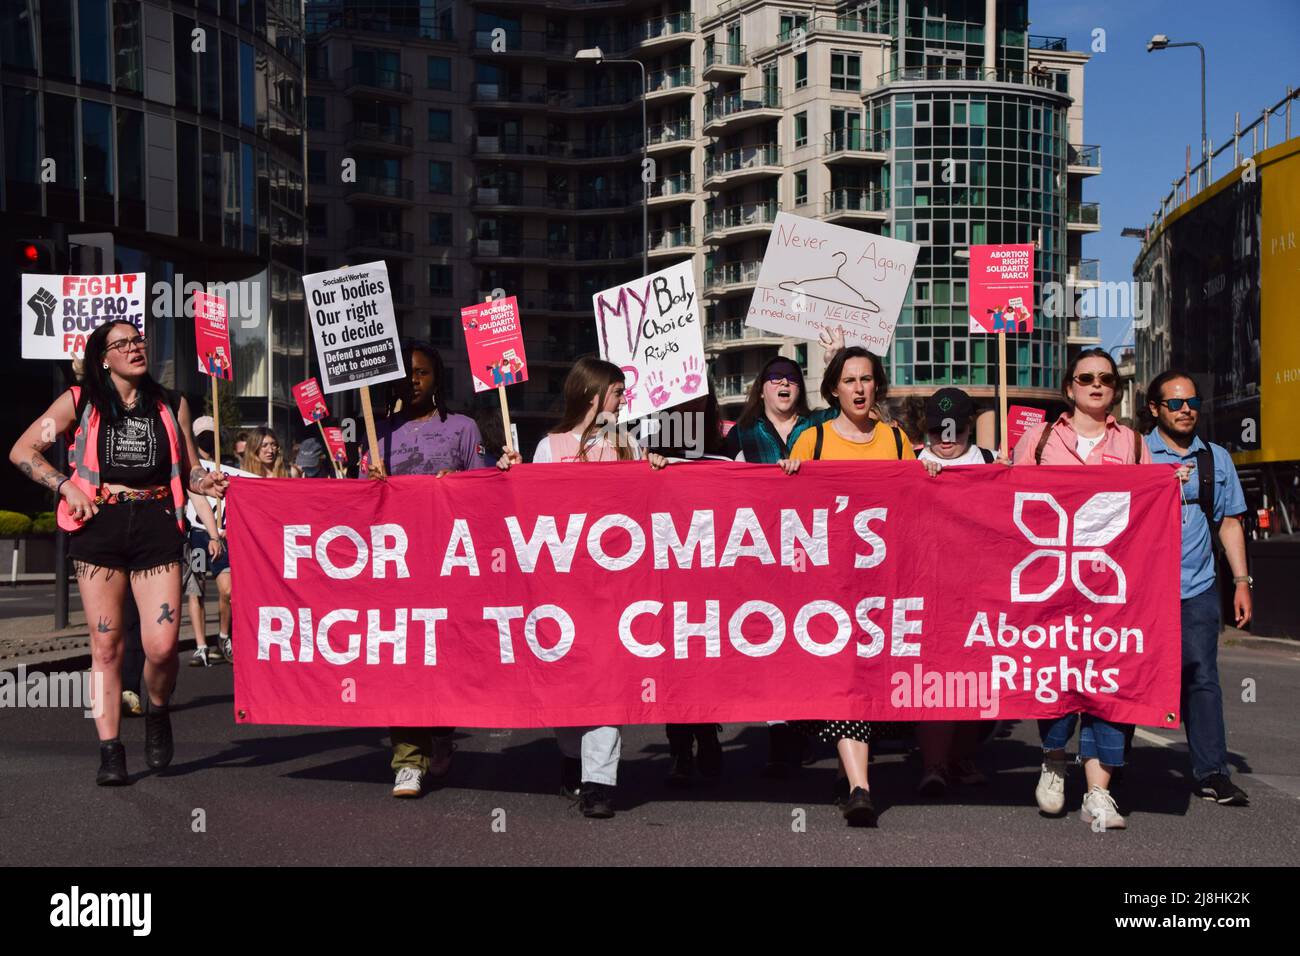 London, UK. 14th May 2022. Pro-choice protesters marched to the US Embassy in London as reports emerge that Roe v. Wade may be overturned, paving the way for abortions to be banned in much of USA. Stock Photo